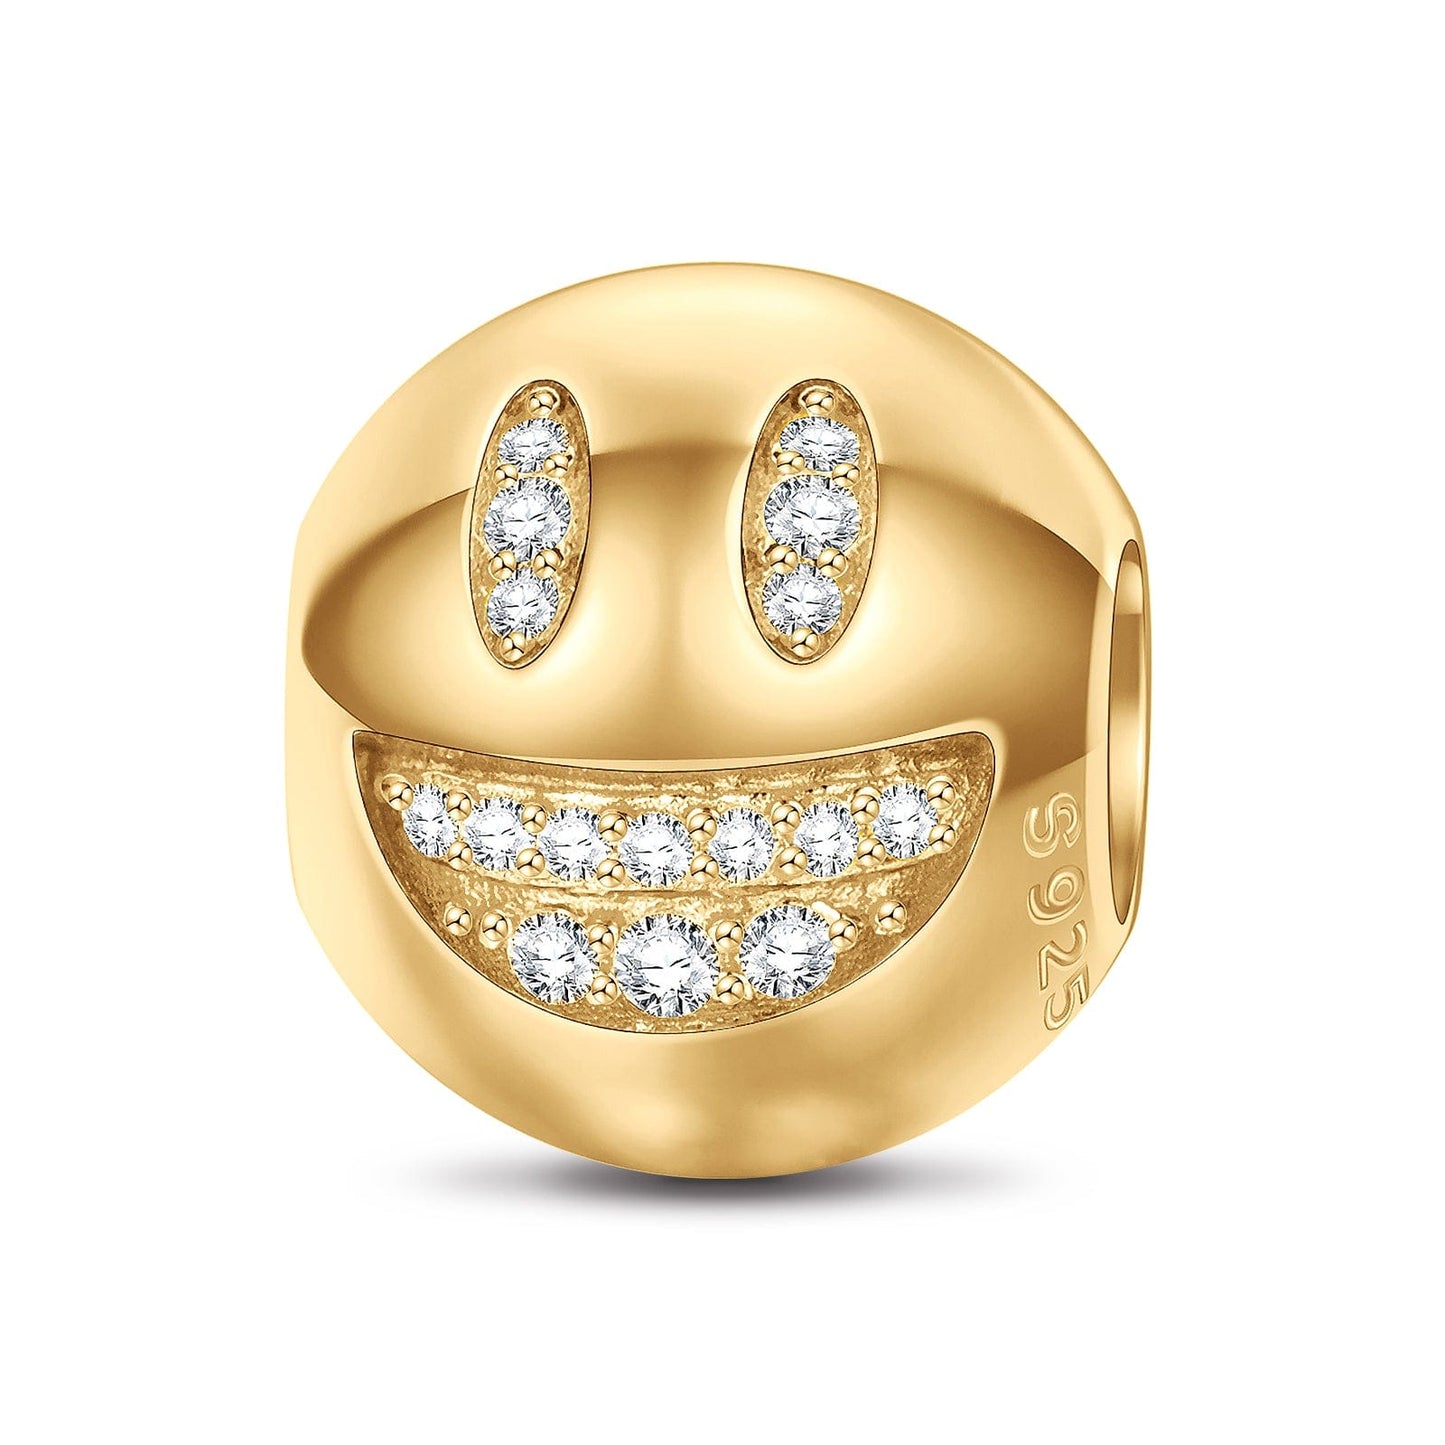 Sterling Silver Smiling With Big Eyes Emoji Charms In 14K Gold Plated